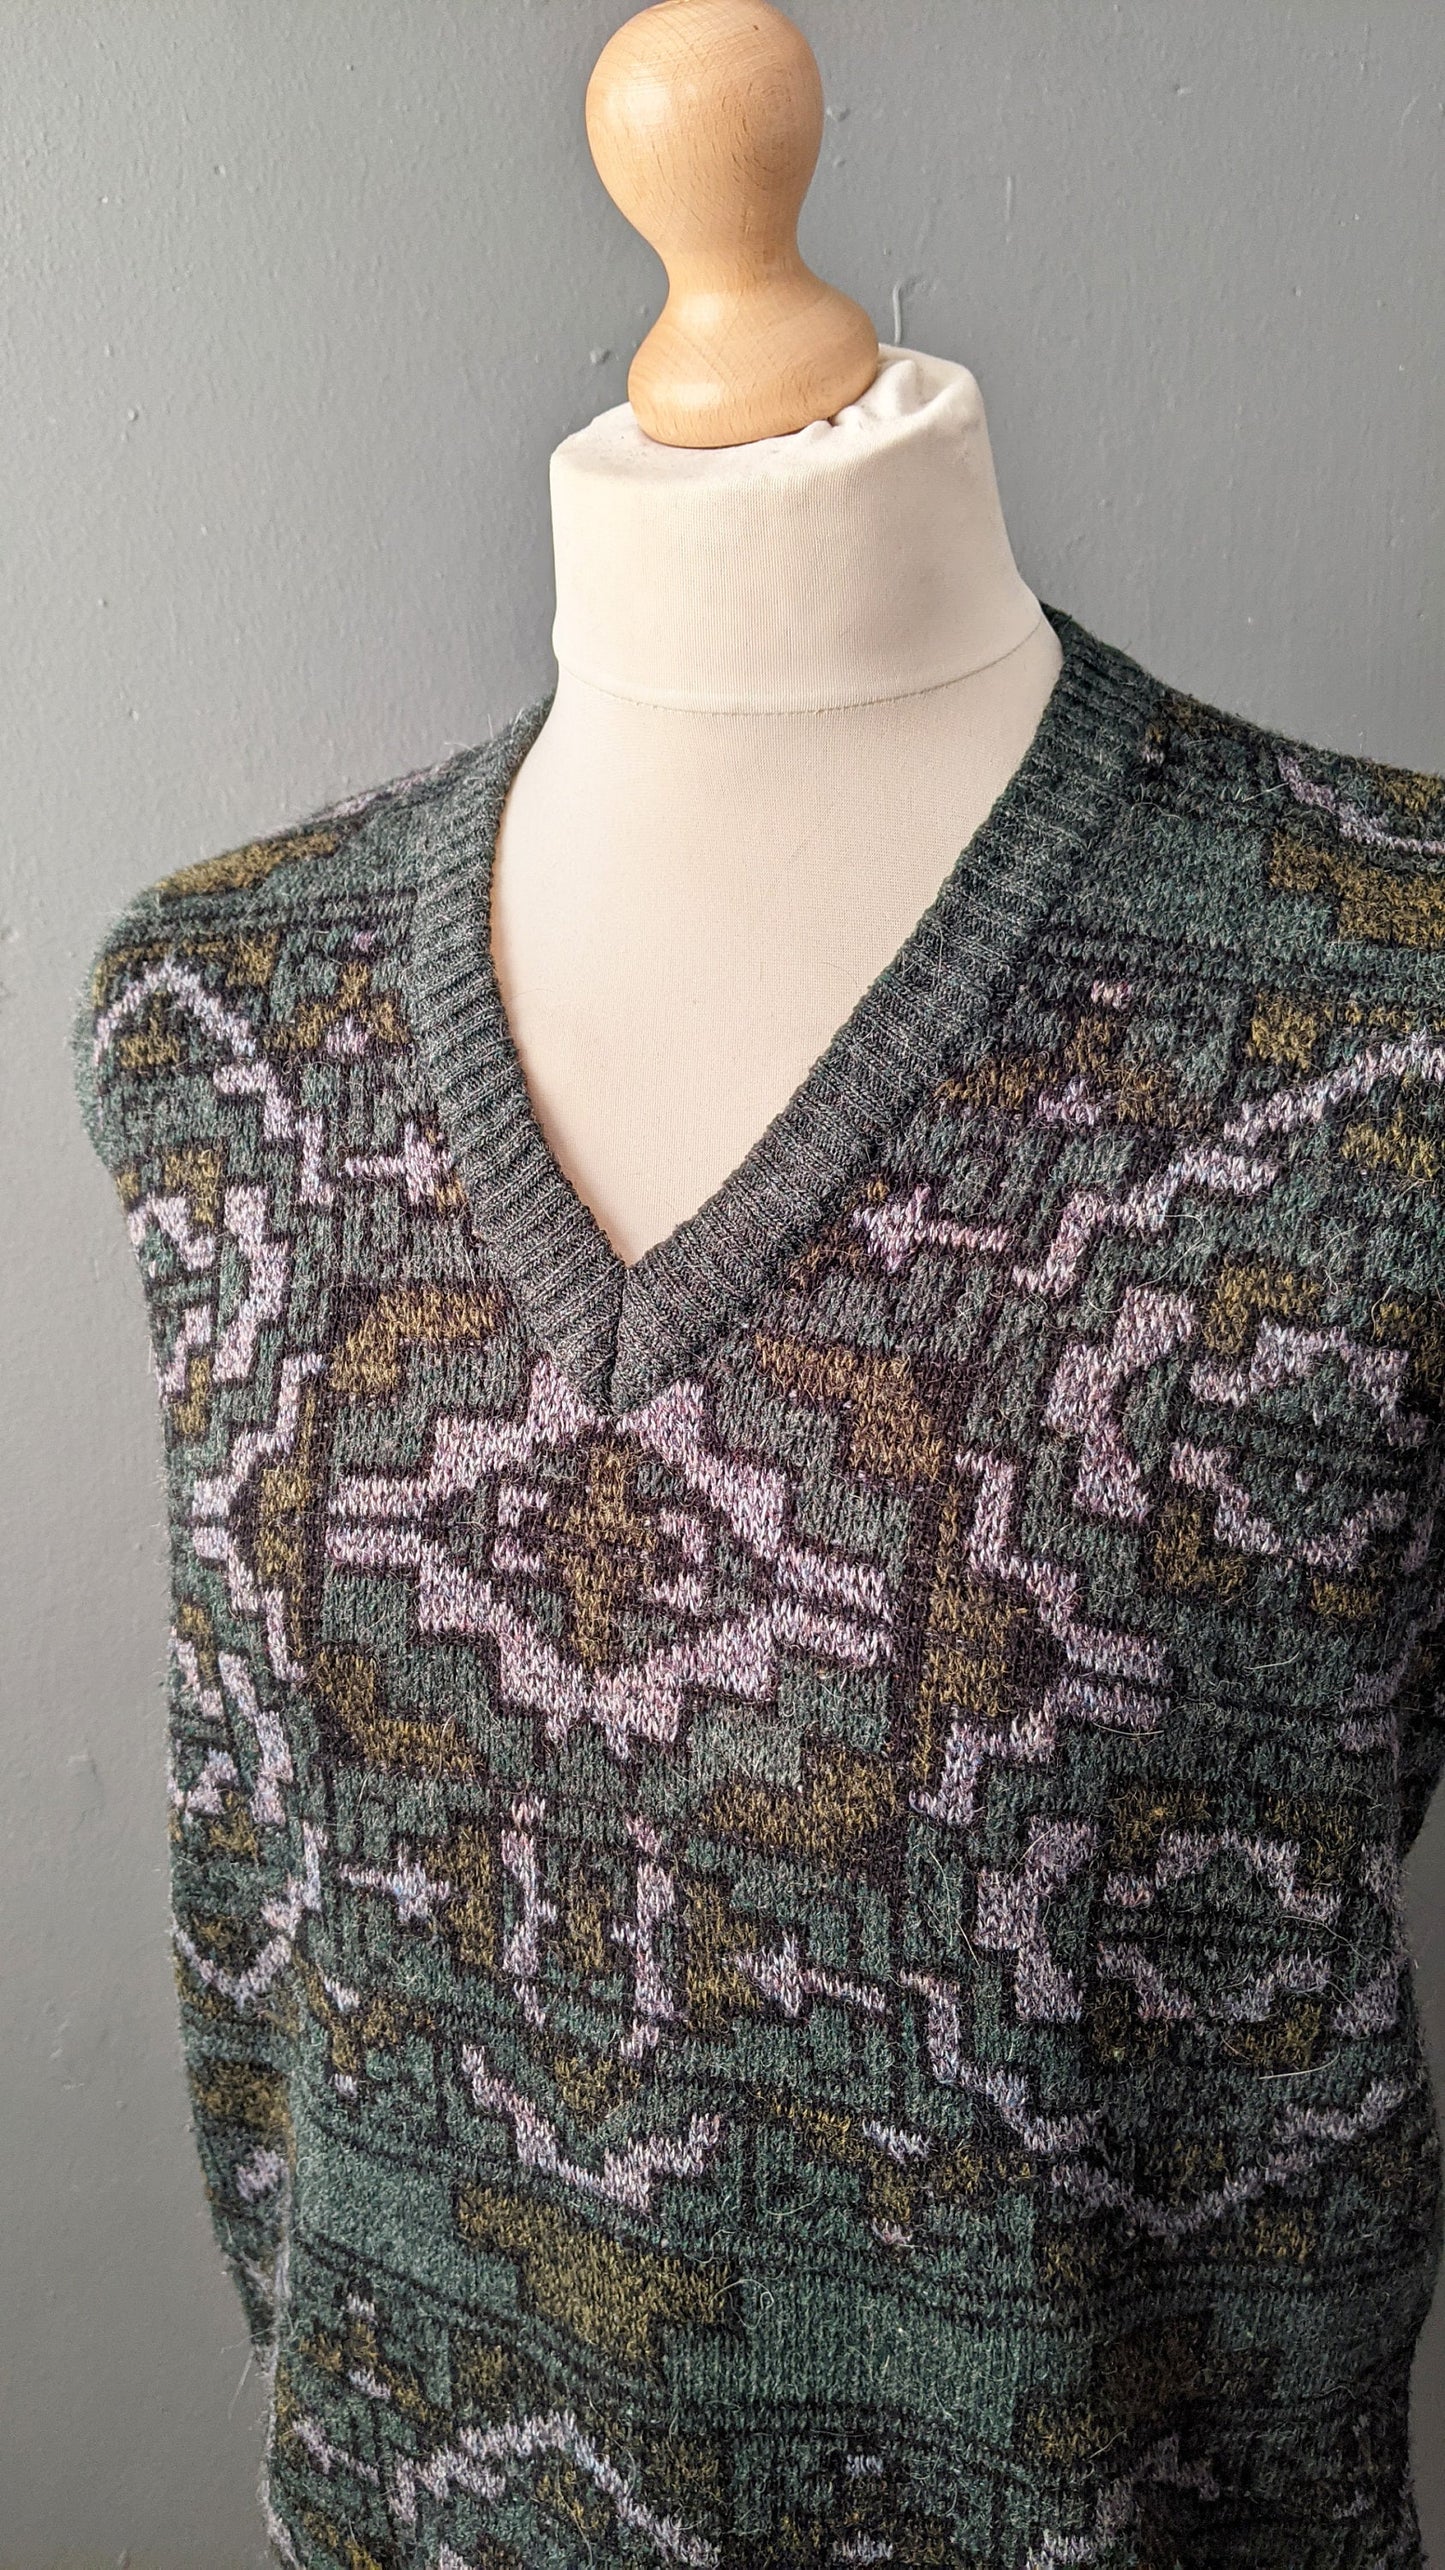 Mens 80s Knit Tank Top with Alpaca, V Neck Wool Blend Vest, 44 Chest